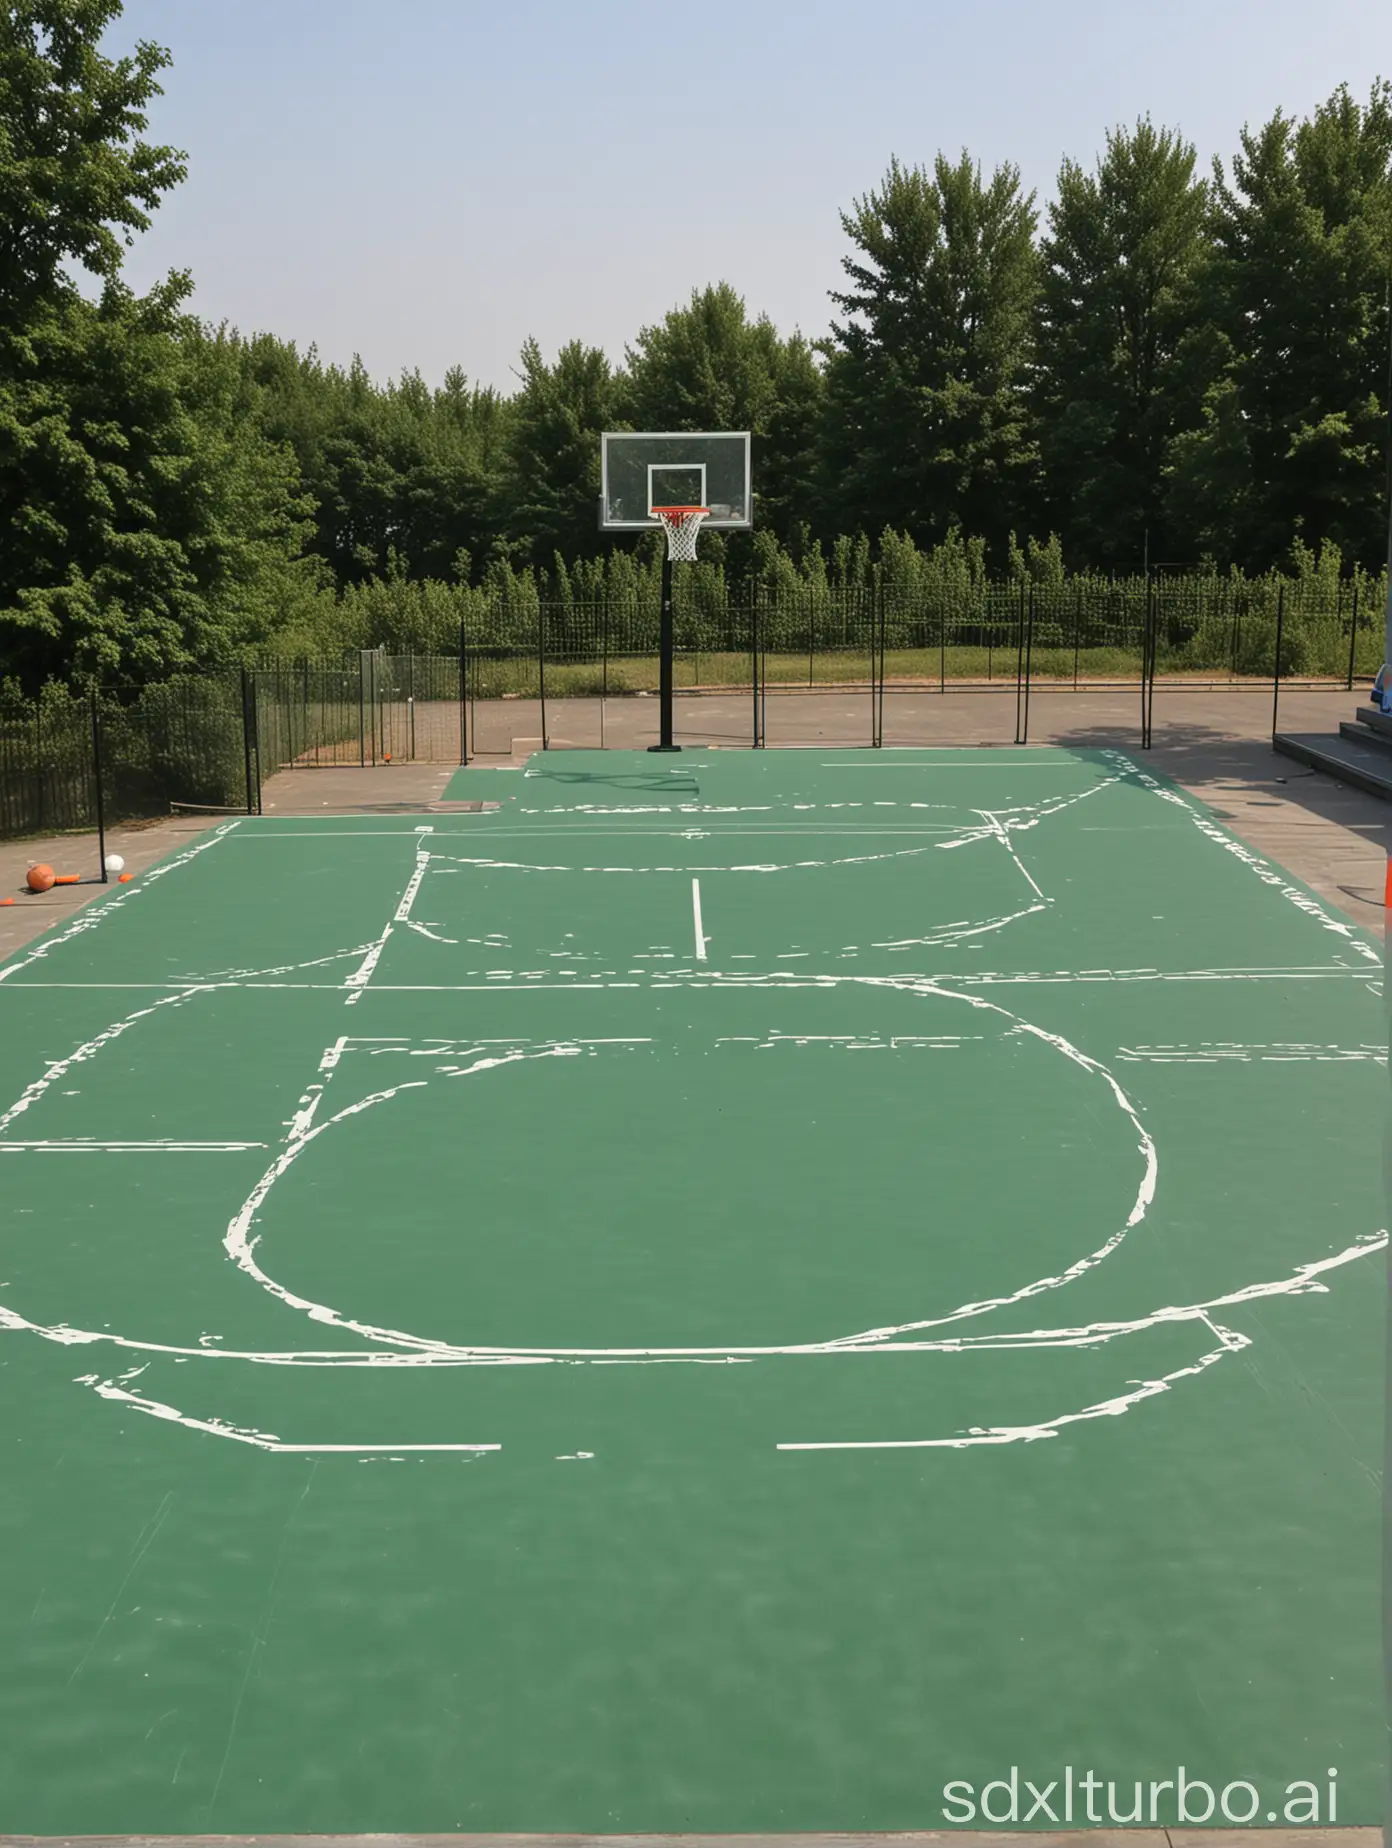 plastic suspended floor made outdoor basketball court picture